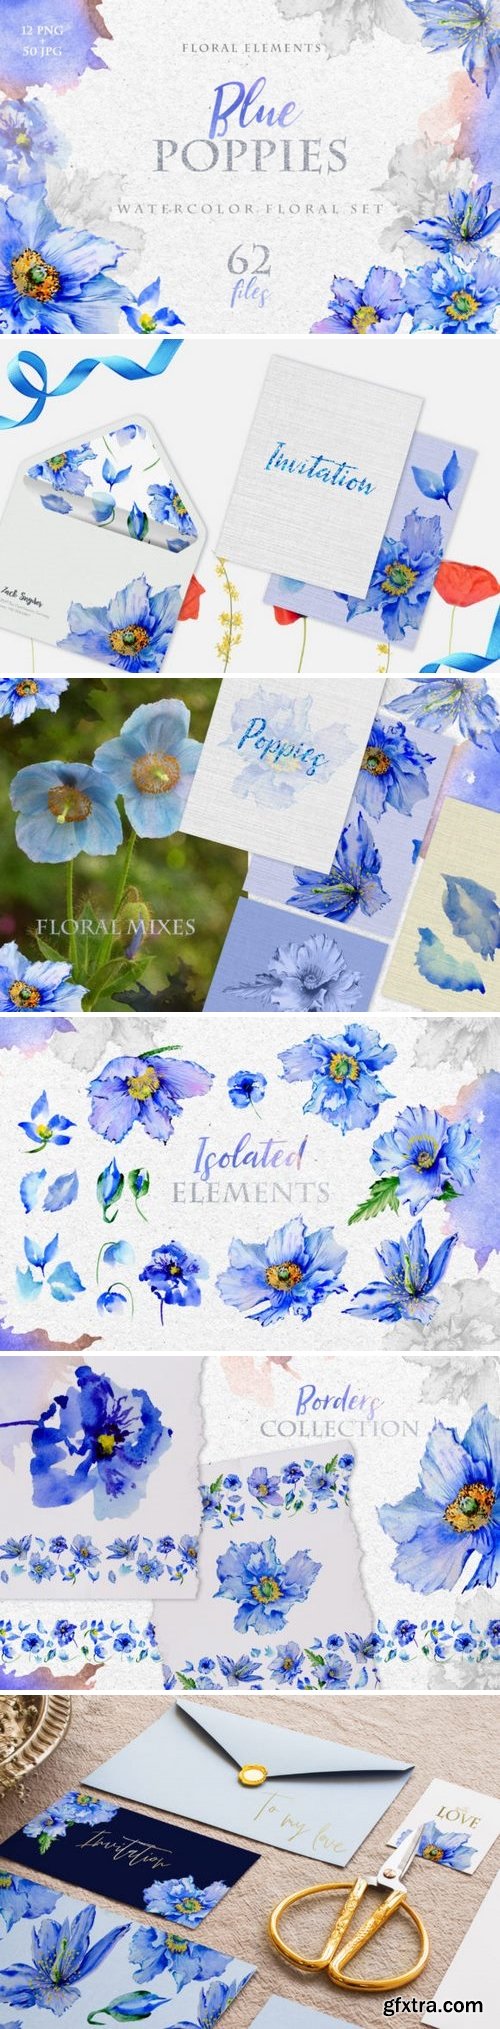 CM - Blue Poppies Watercolor png 3319870